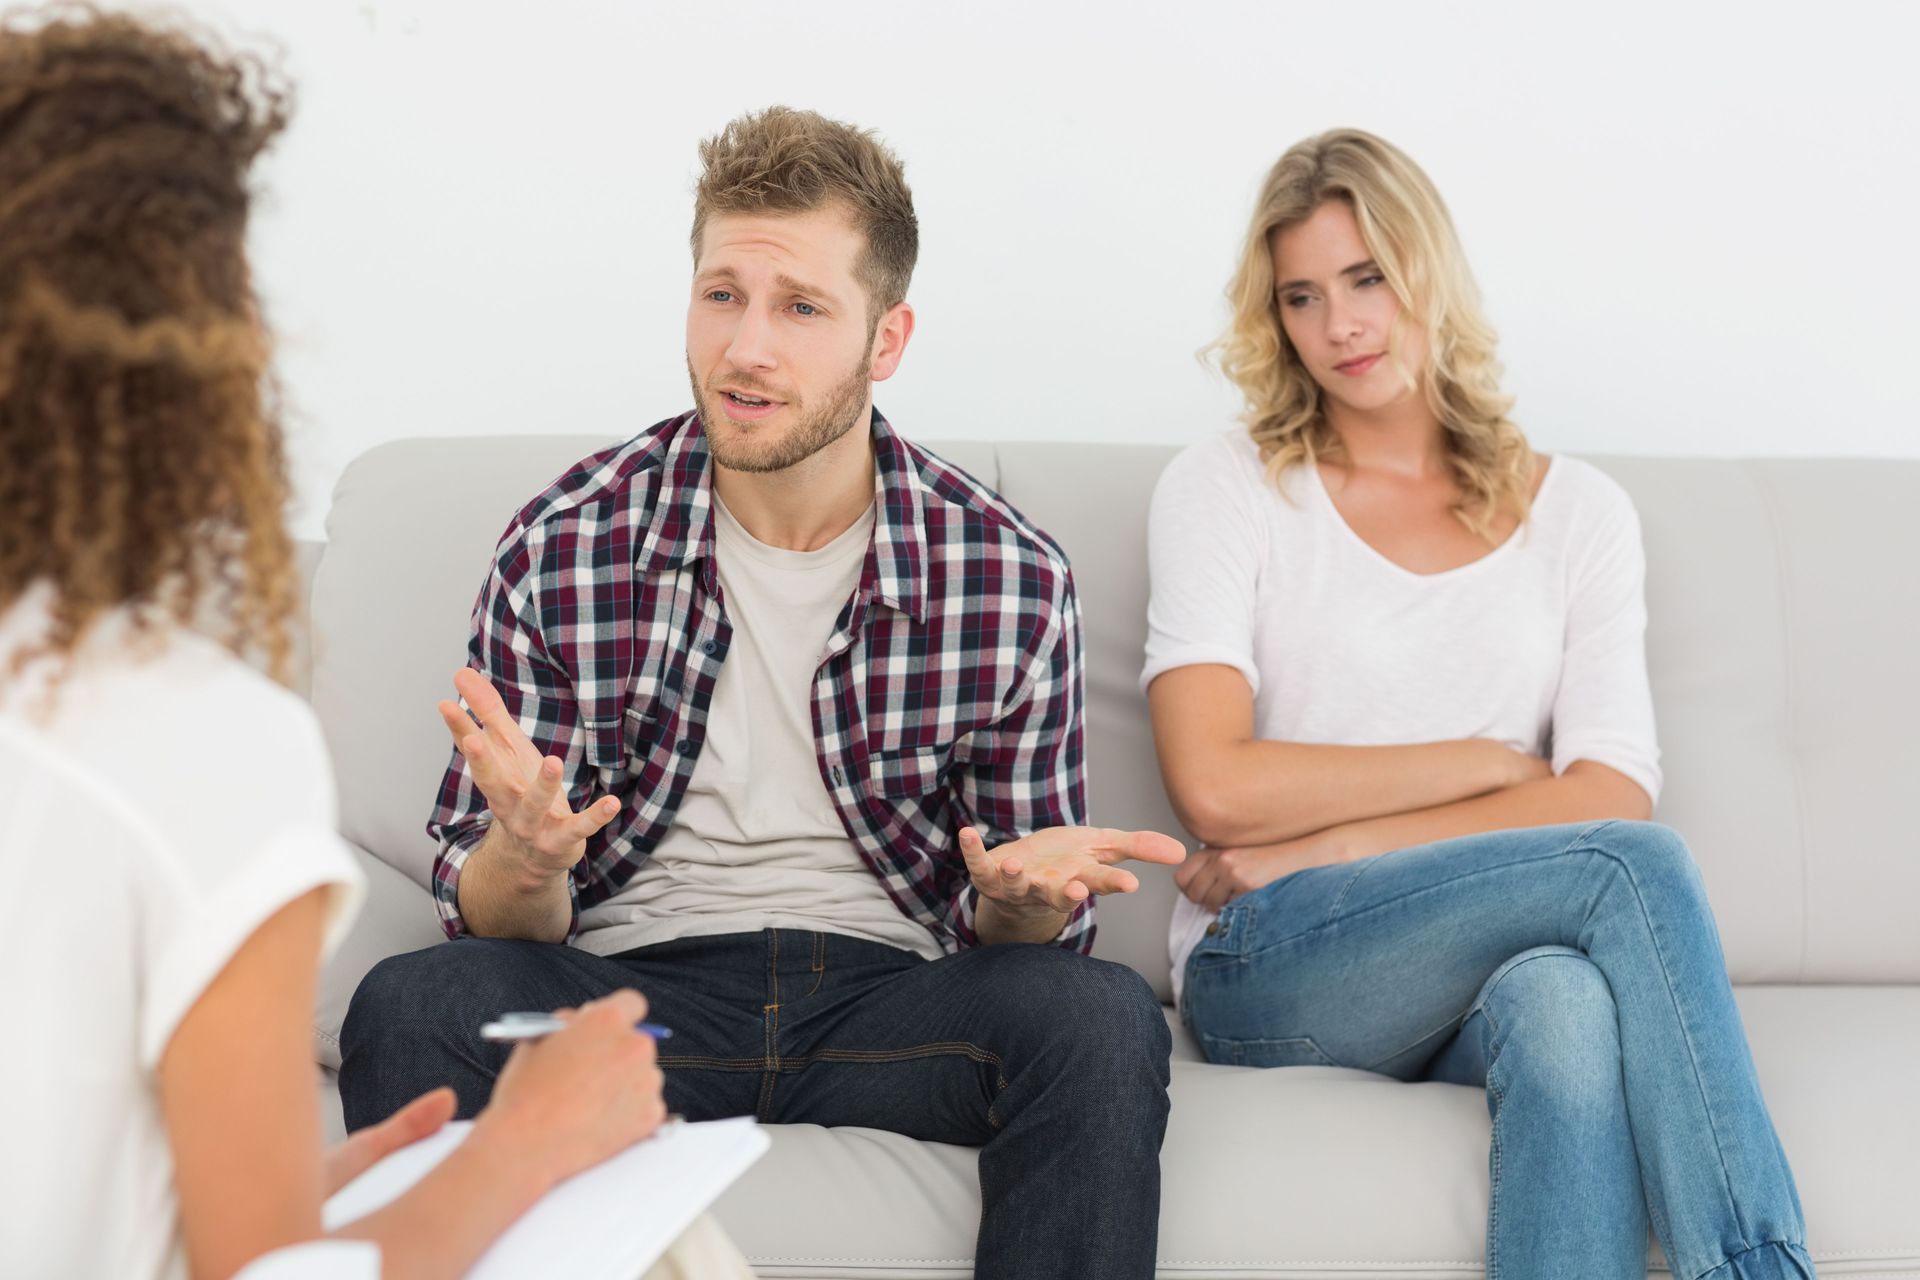 Man & woman sitting in couples therapy talking about their relationship issues. Overcoming infidelity can happen through marriage counseling via online therapy in Colorado.